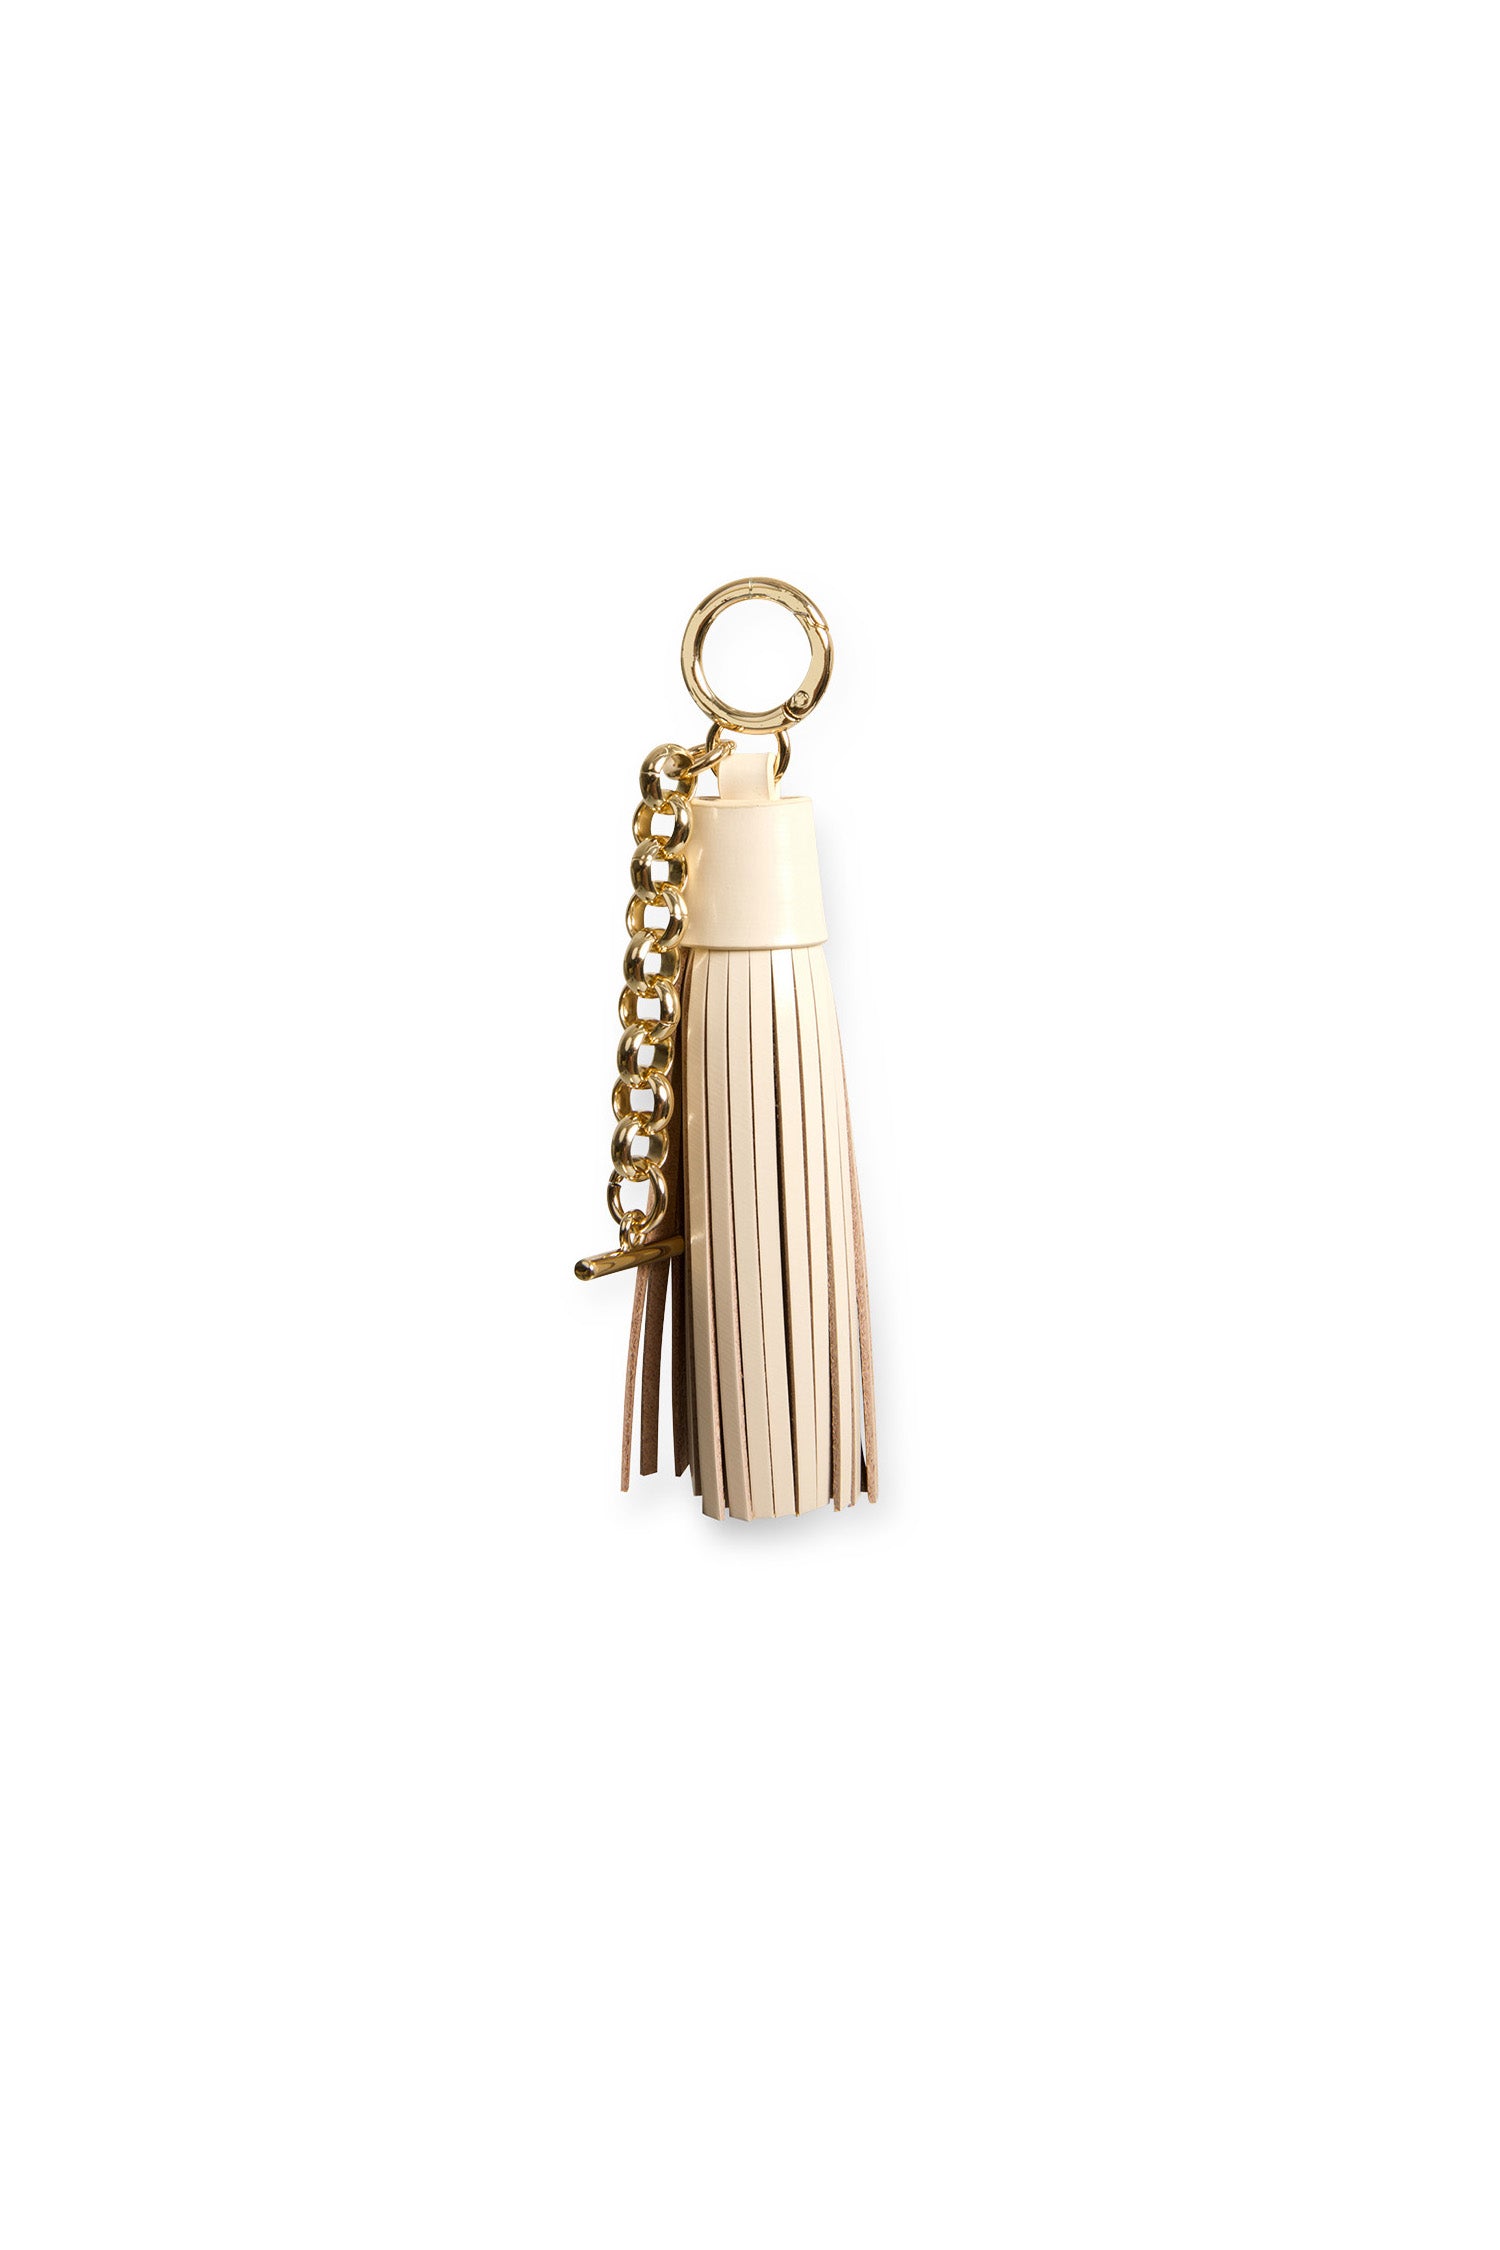 The Harlow Lux Keychain Cream Light Gold